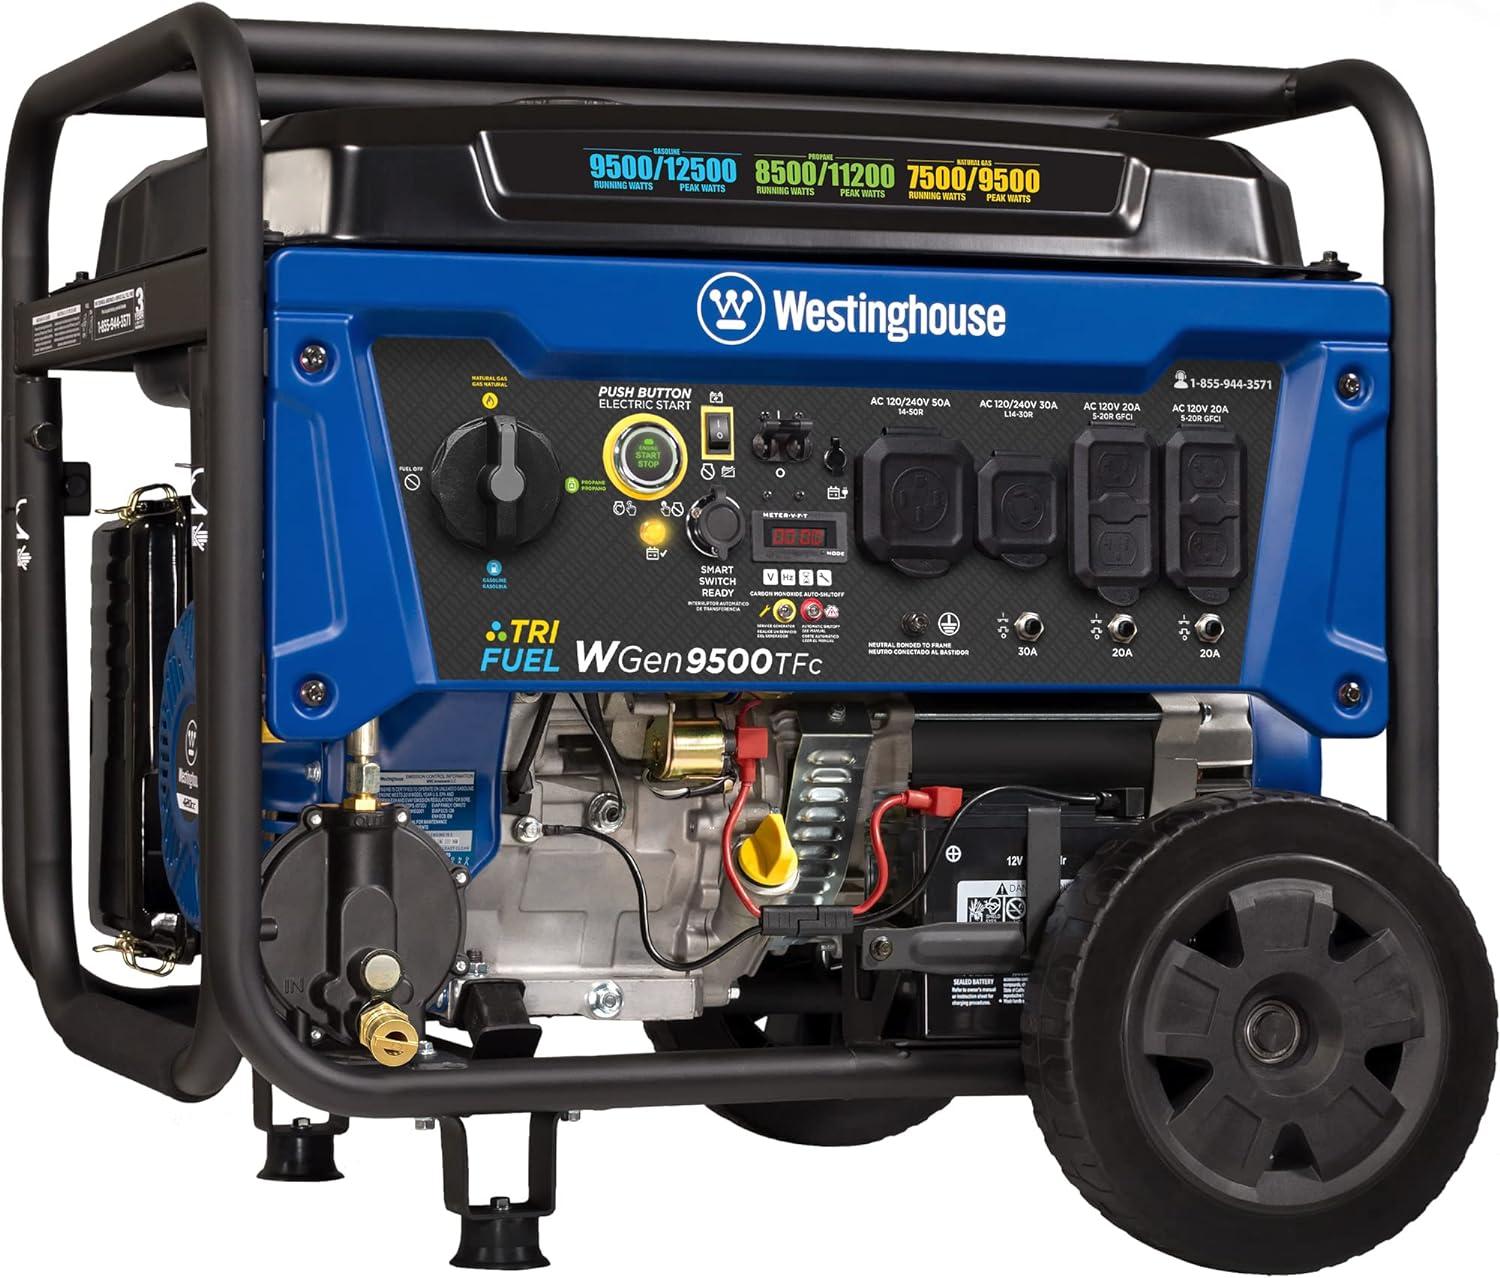 Westinghouse Outdoor Power Equipment 12500W Portable Generator for $899 Shipped